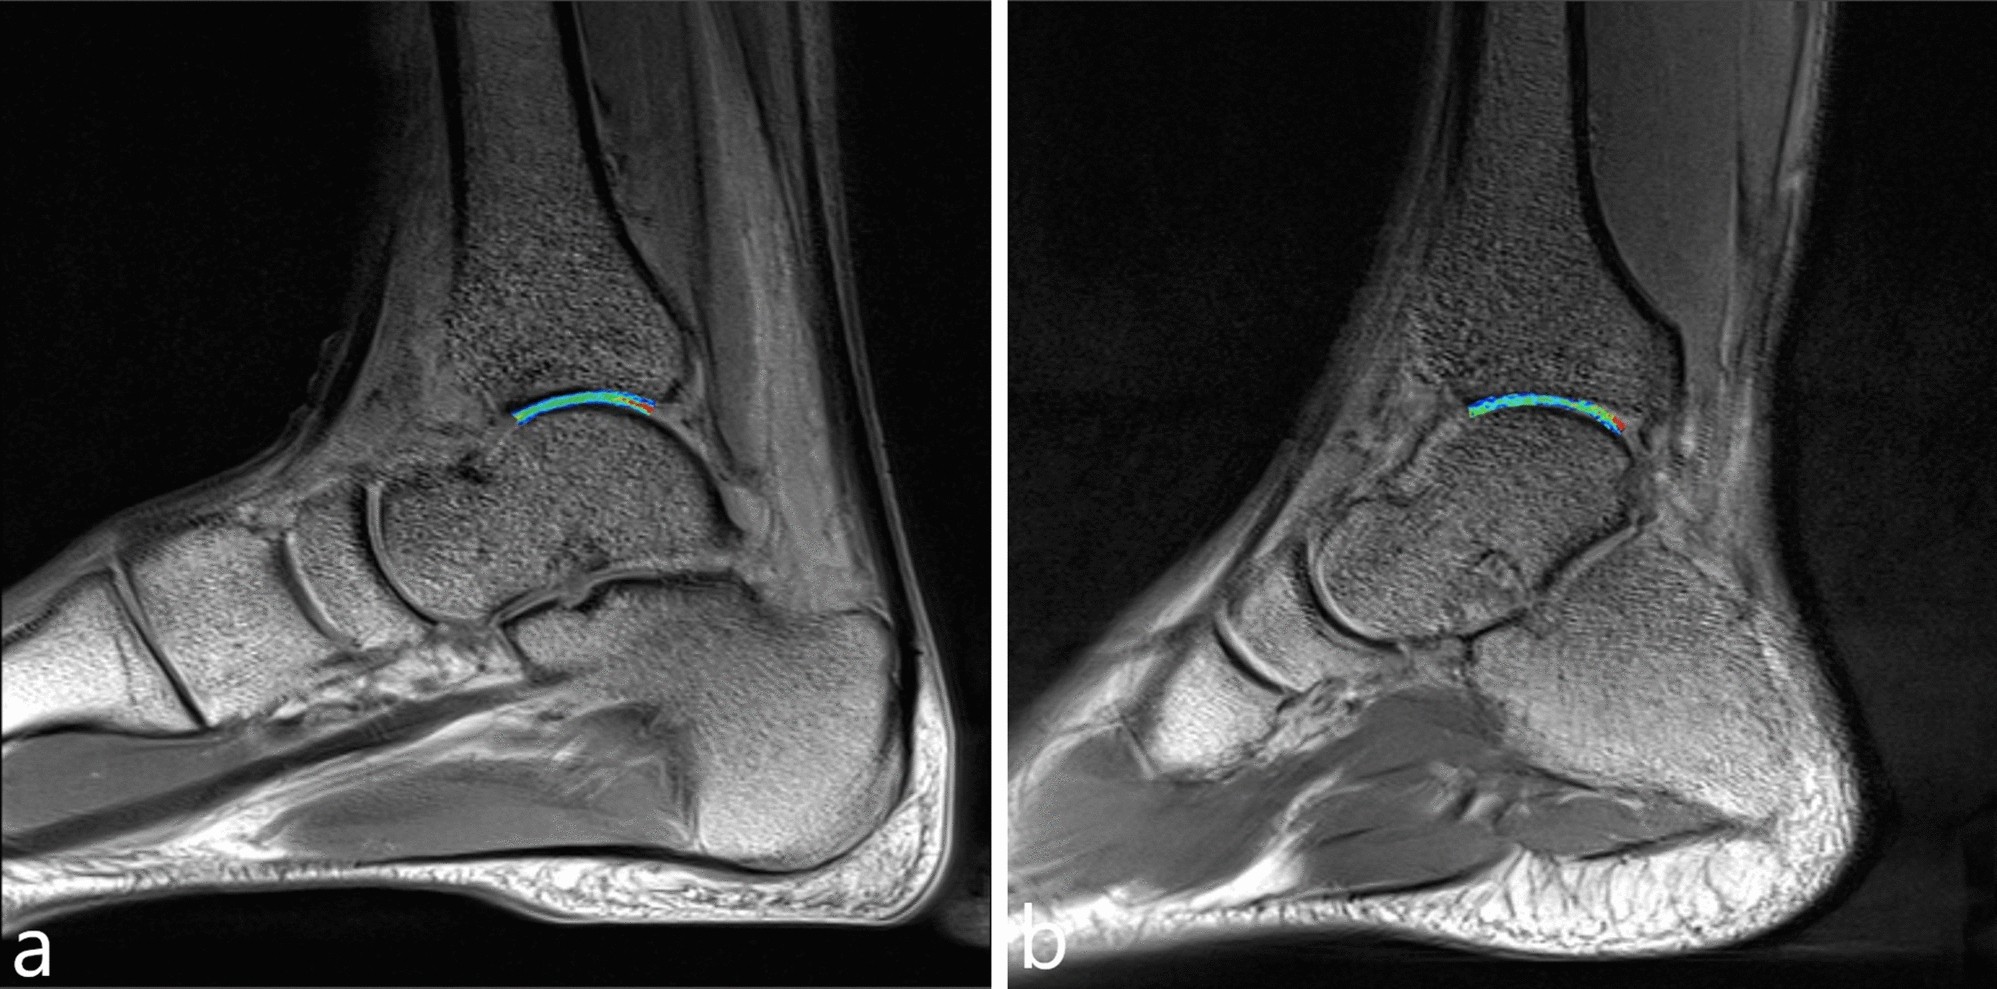 T2 mapping for quantitative assessment of ankle cartilage of weightlifters  | Scientific Reports